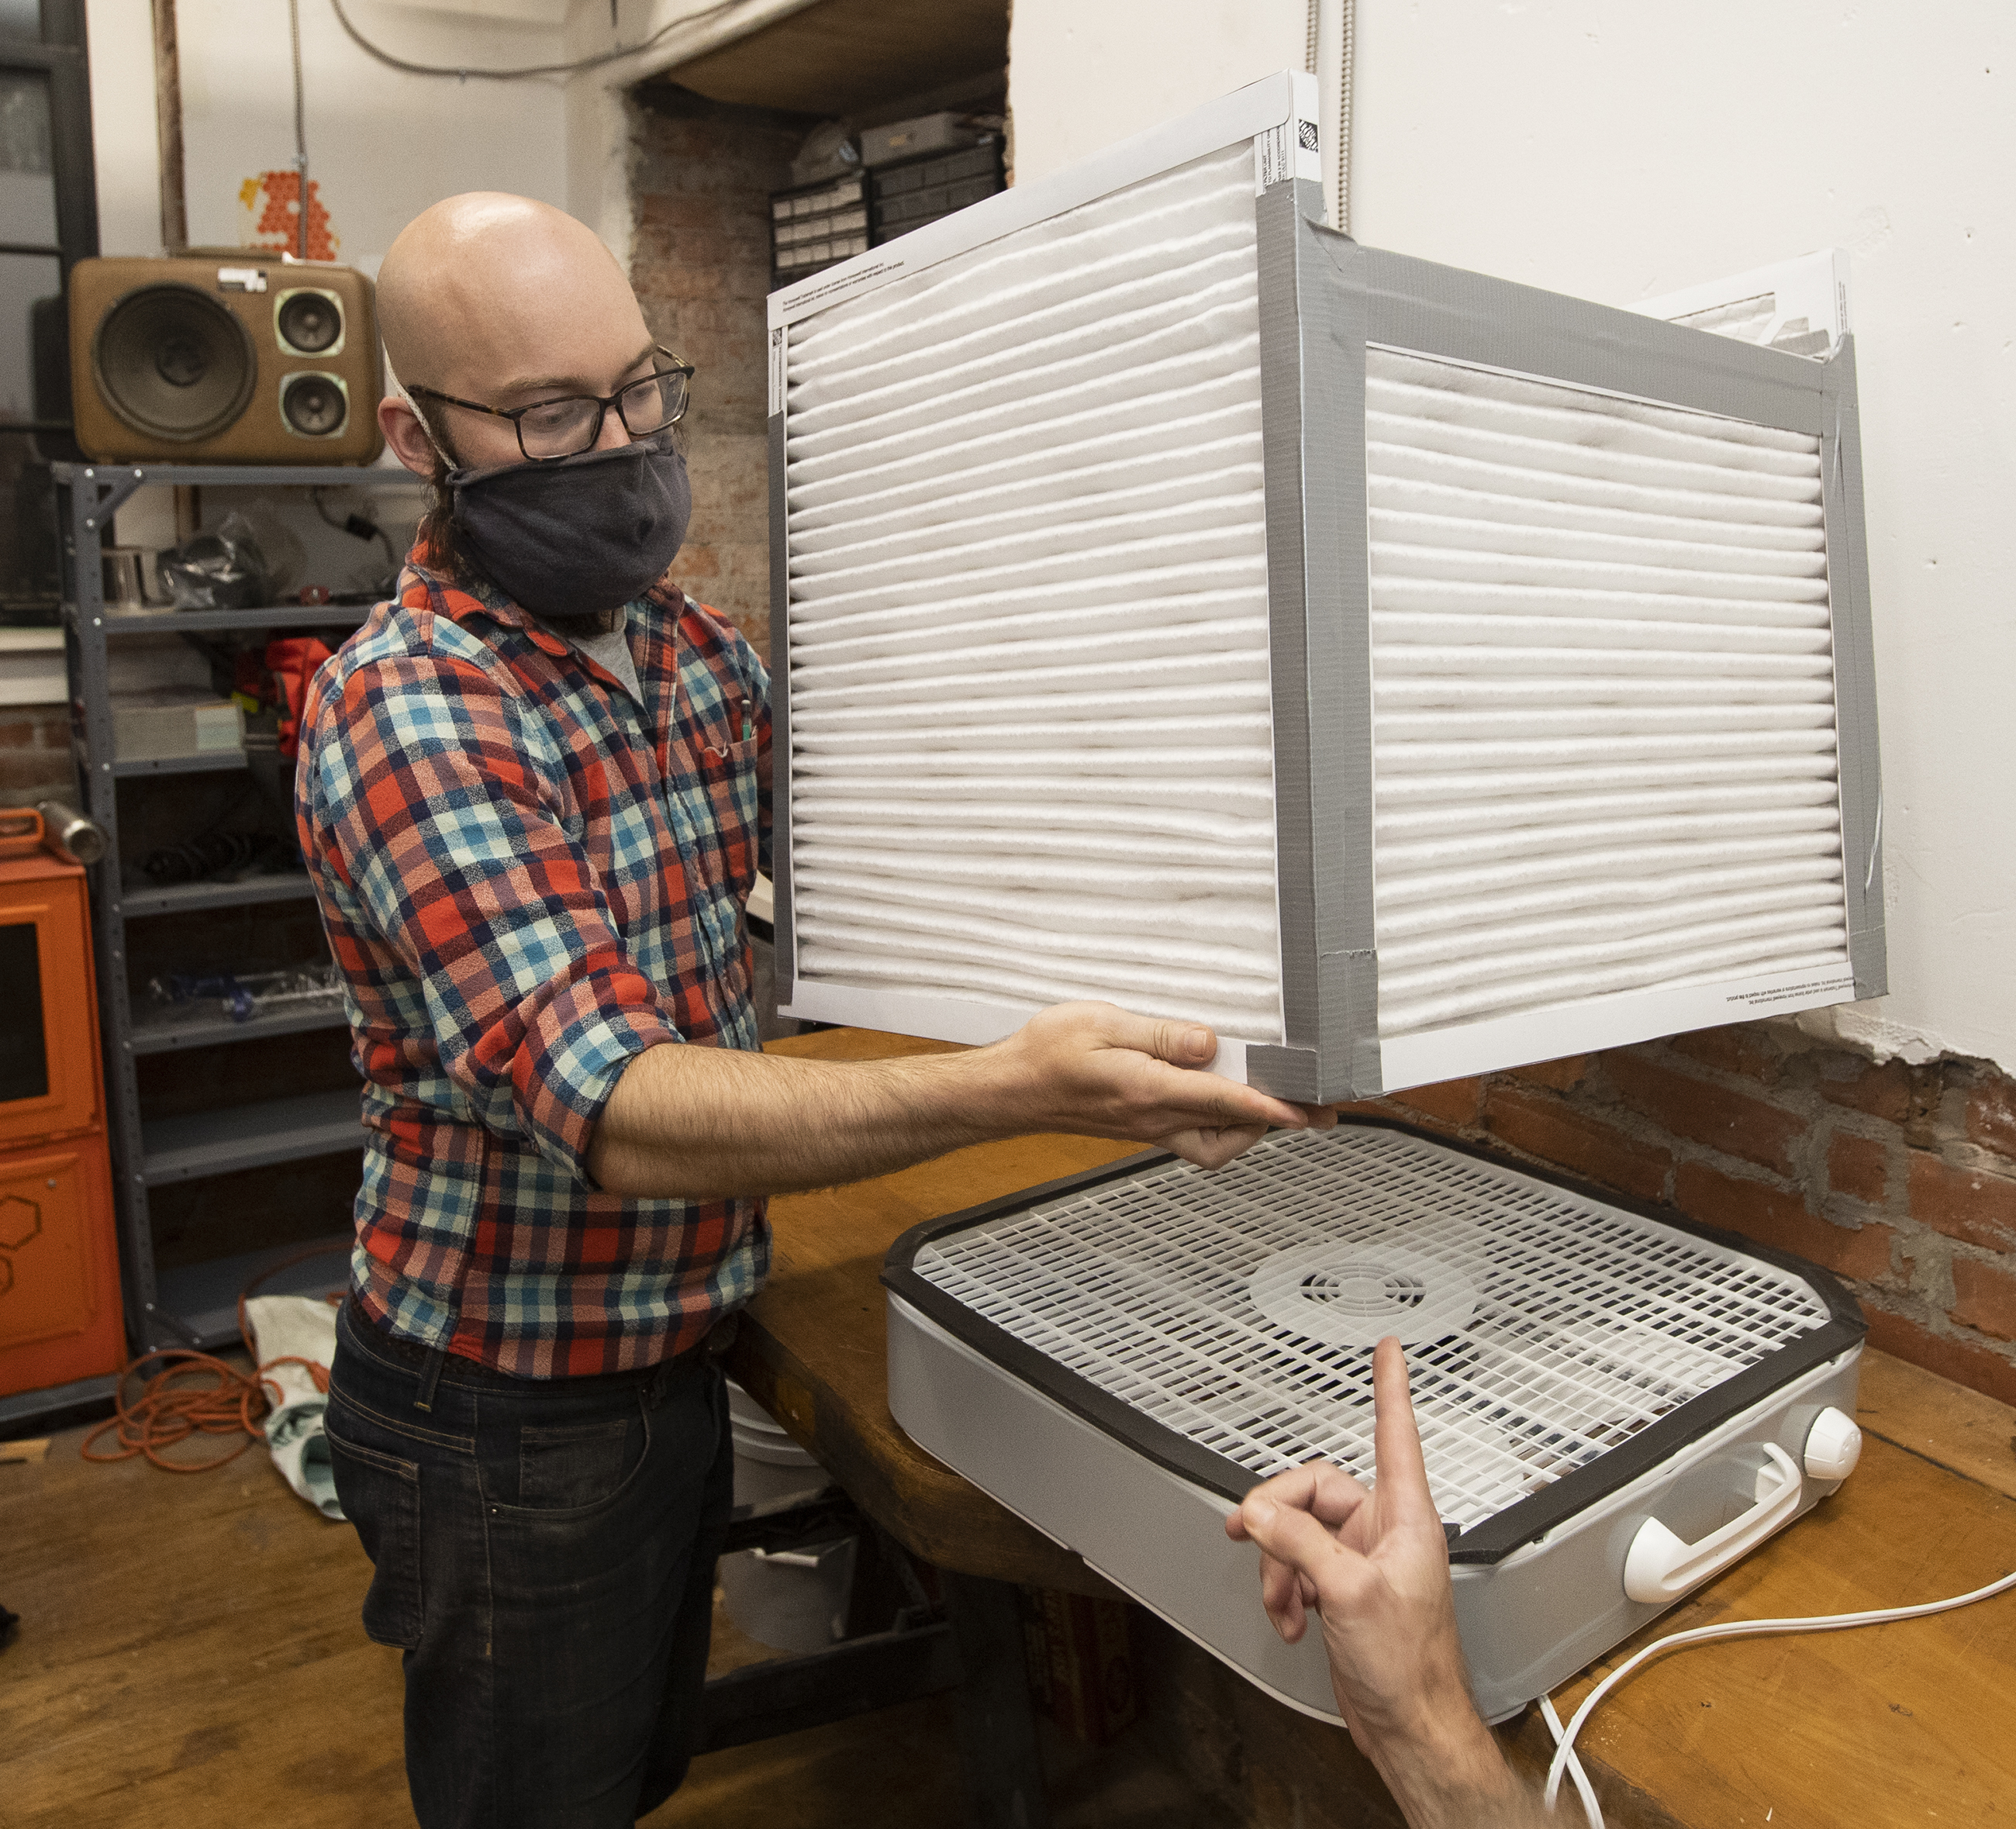 Make This Diy Air Filter To Possibly Reduce Your Indoor Exposure Coronavirus